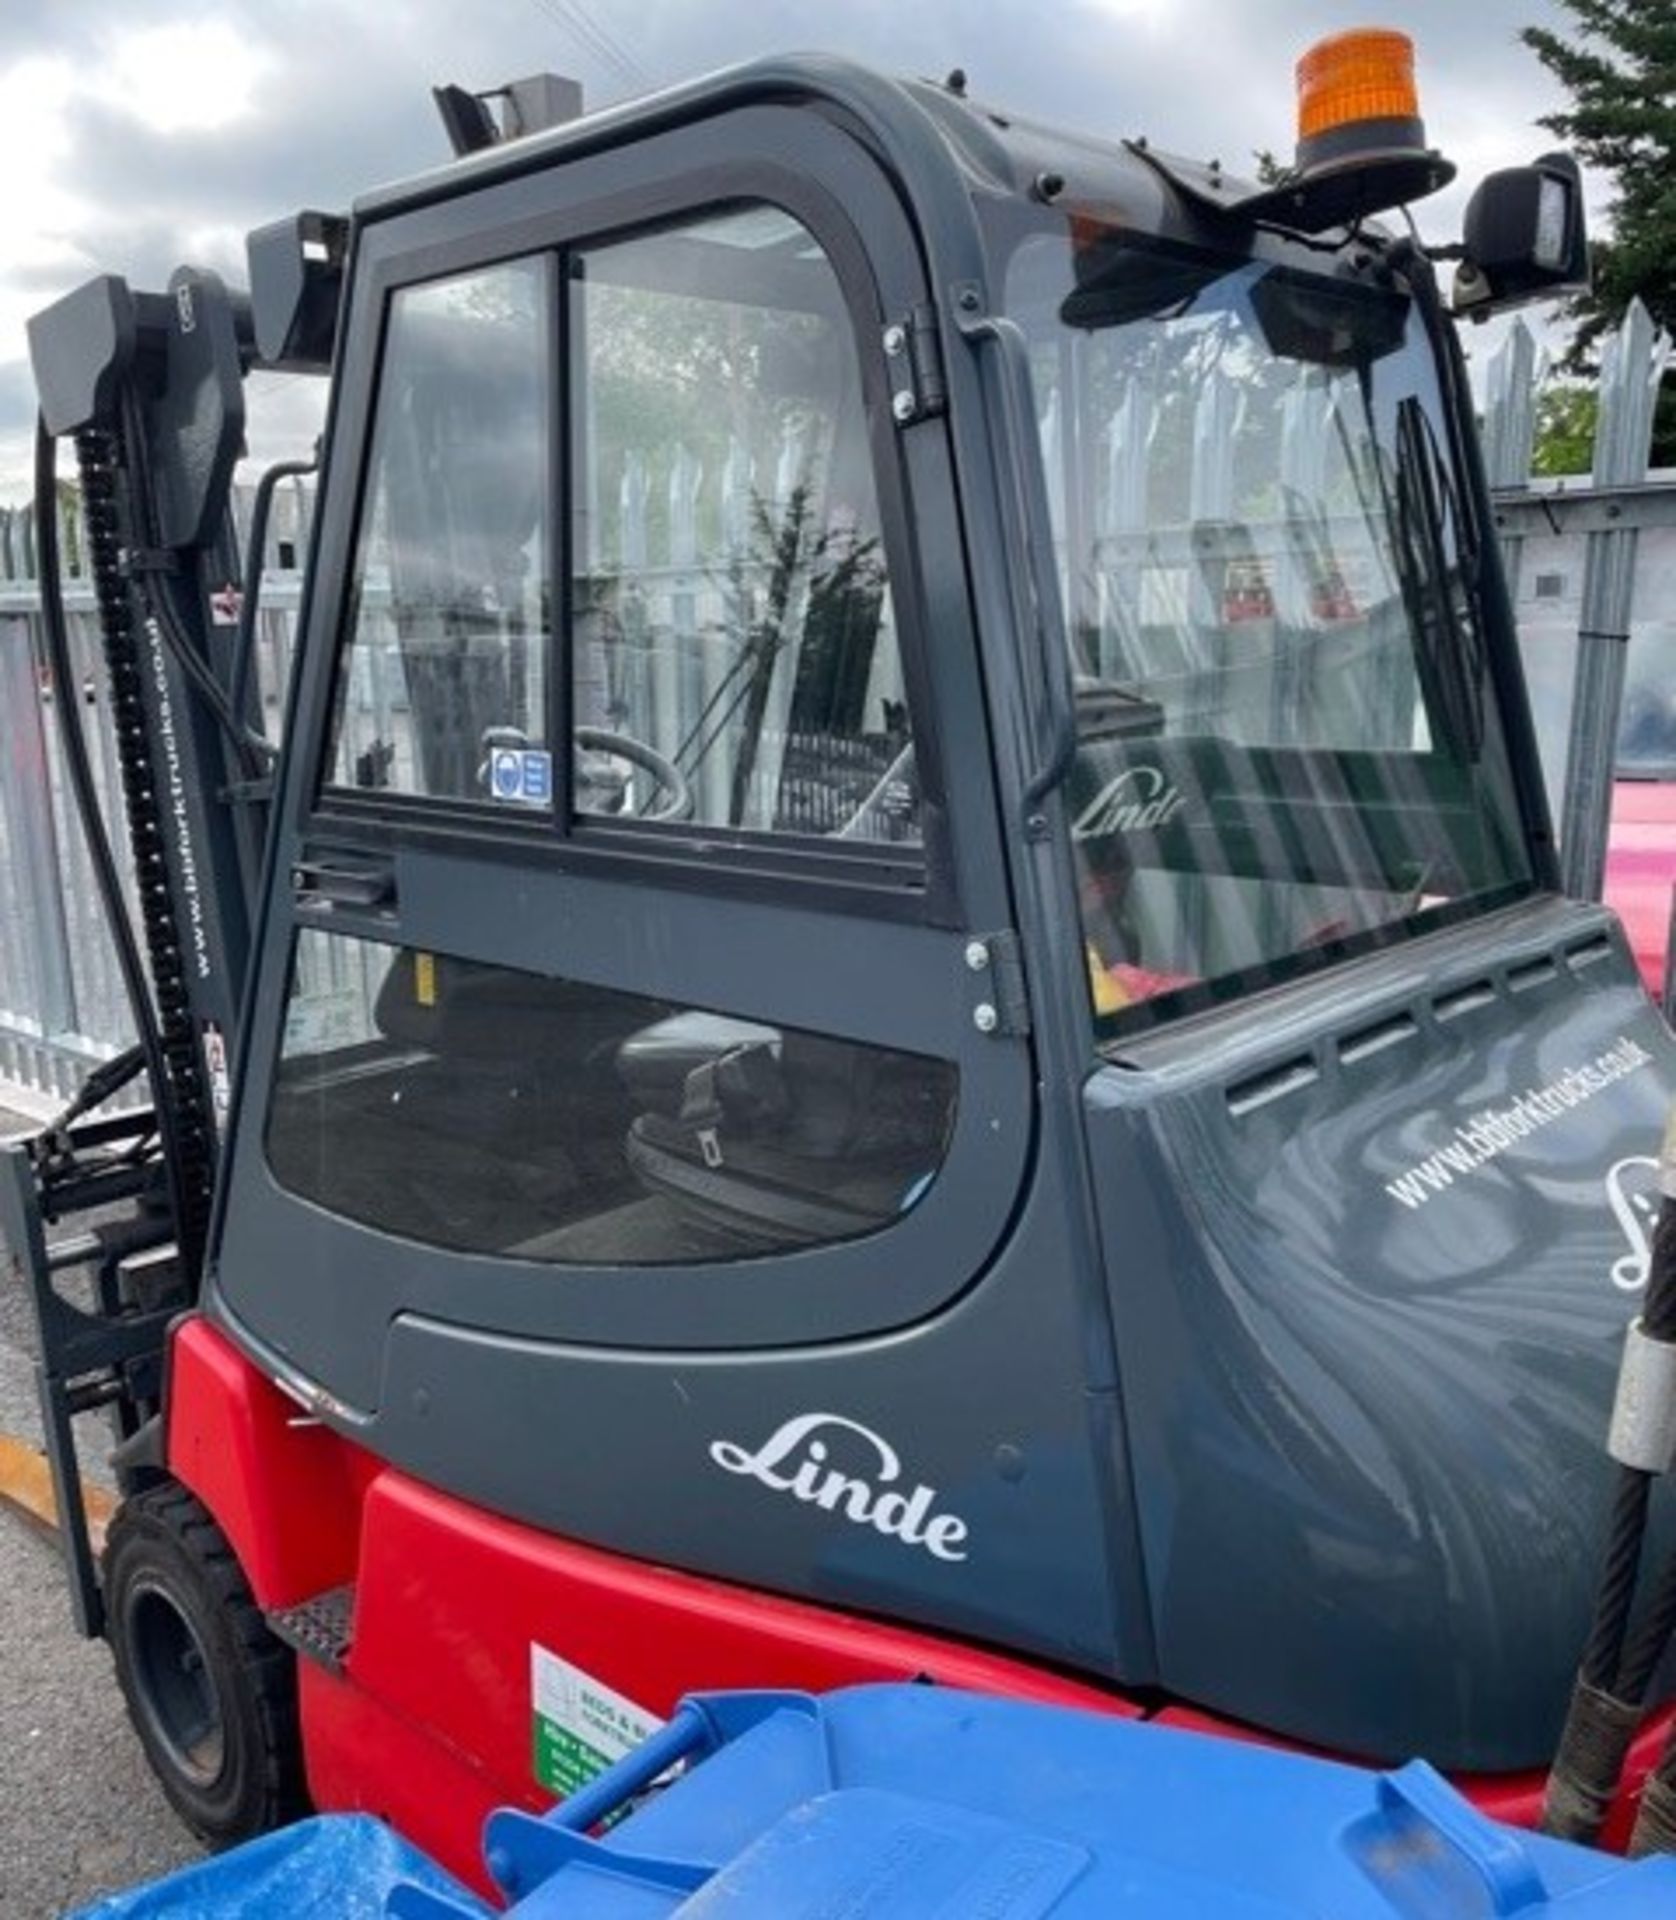 Linde E30 4 Wheel Electric Forklift (2008) 3000Kg Capacity, Serial Number; G1X336W50734 with Side - Image 4 of 8